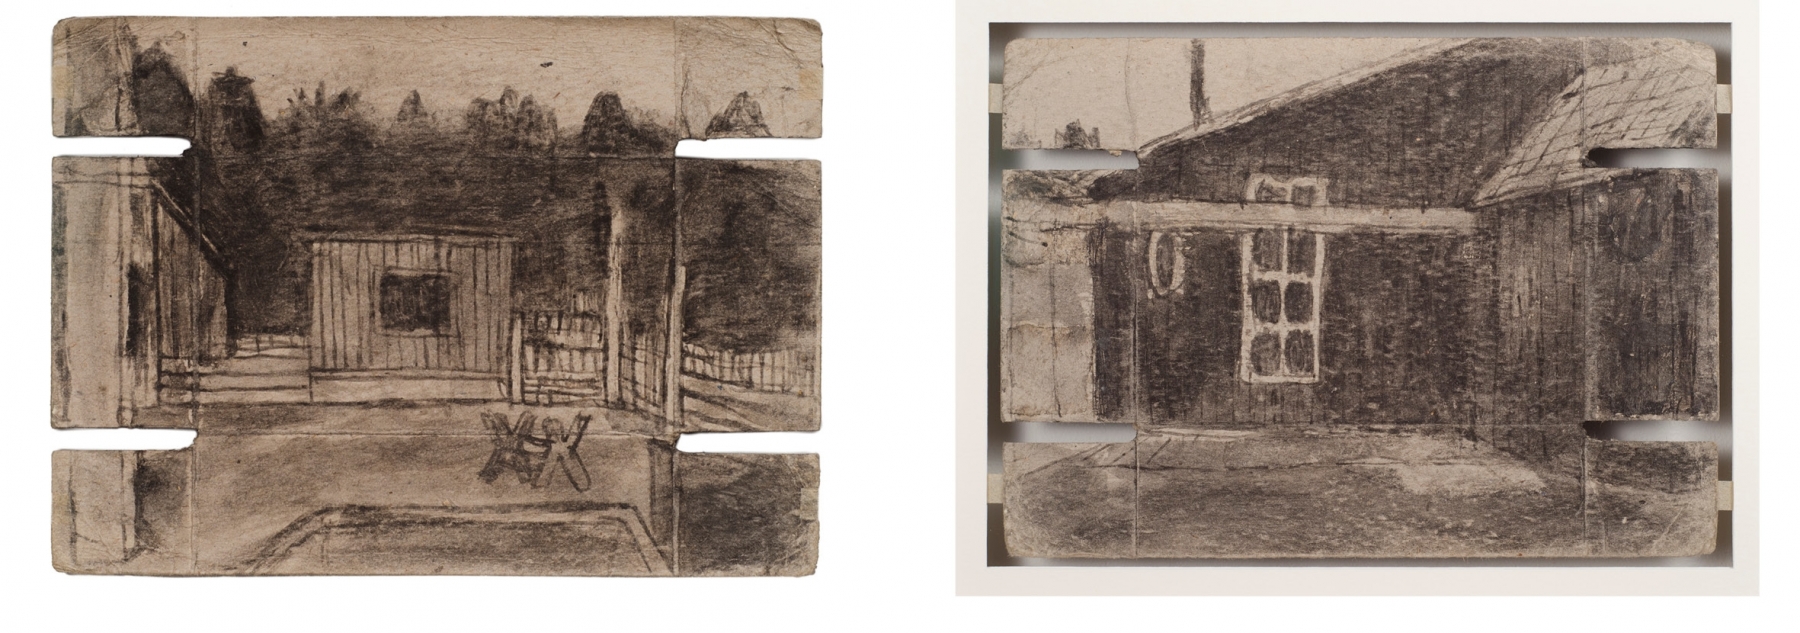 James Castle,&amp;nbsp;Untitled (Shed with sawhorse/shed), n.d.;&amp;nbsp;soot and saliva on found paper,&amp;nbsp;5 1/2h x 7 3/8w in/&amp;nbsp;13.97h x 18.73w cm